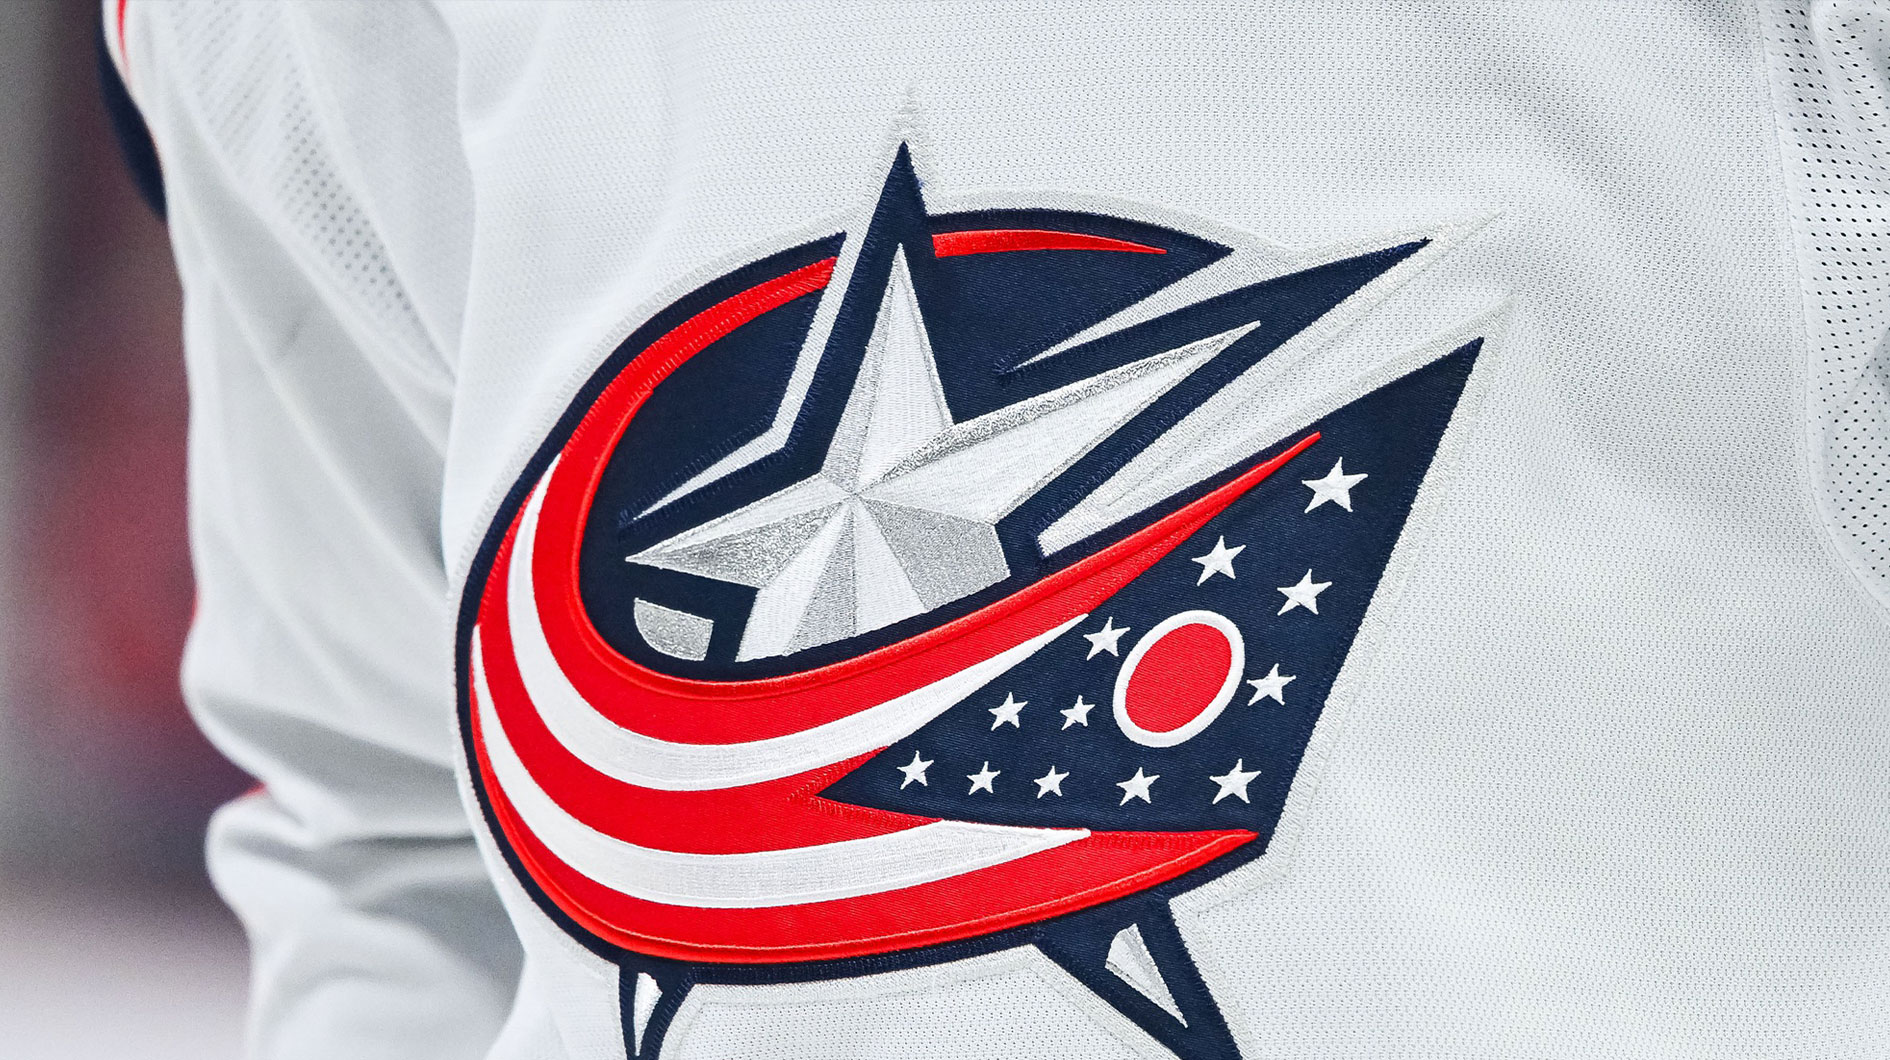 View of a Columbus Blue Jackets logo on a jersey worn by a member of the team during warm-up before the game against the Montreal Canadiens at Bell Centre.